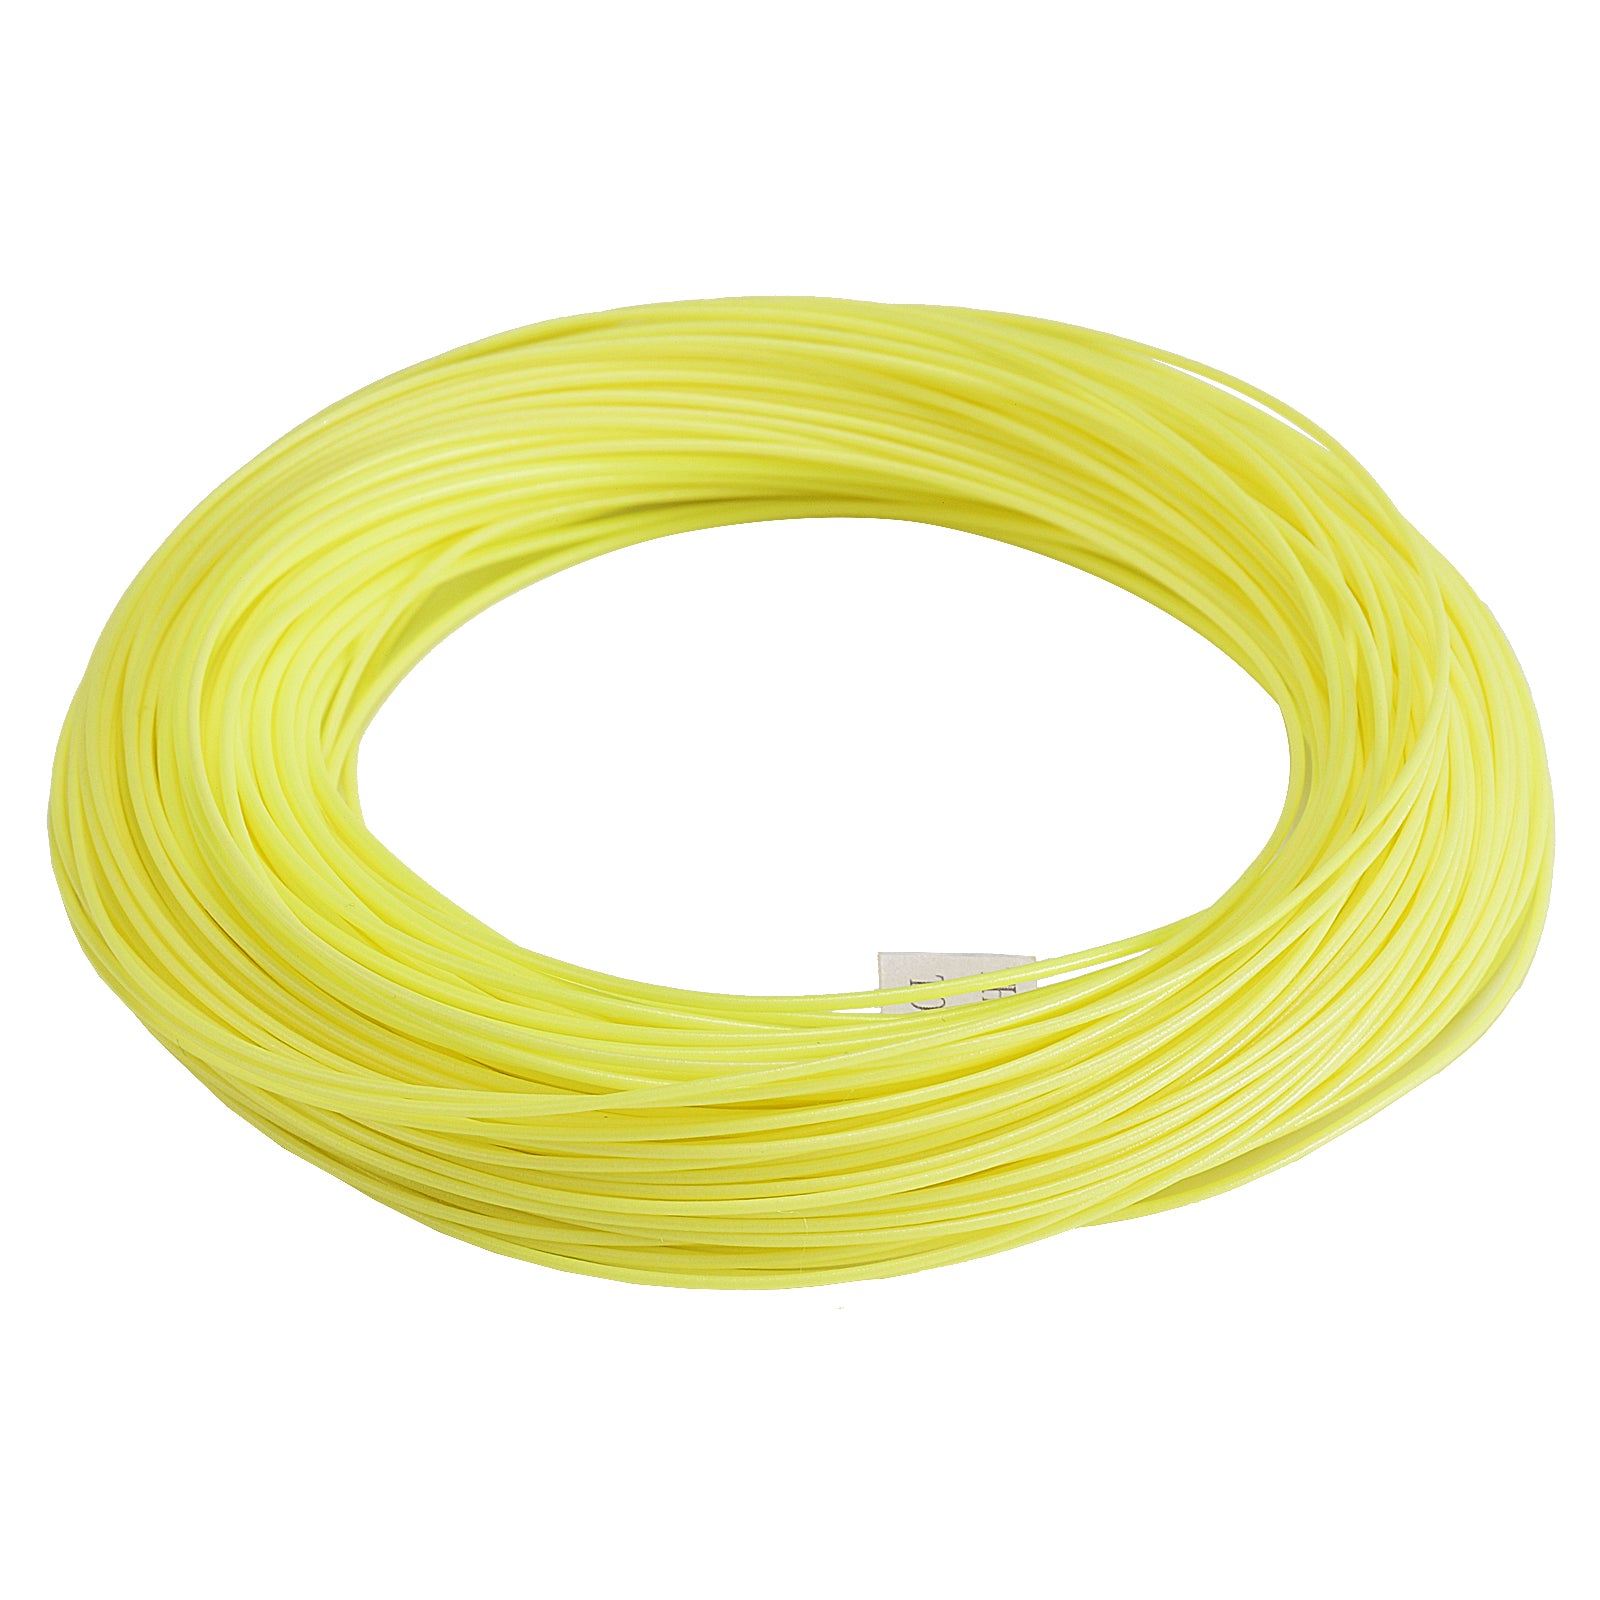 SF Fly Fishing Line Weight Forward Floating Line Welded Loop 100FT Wit